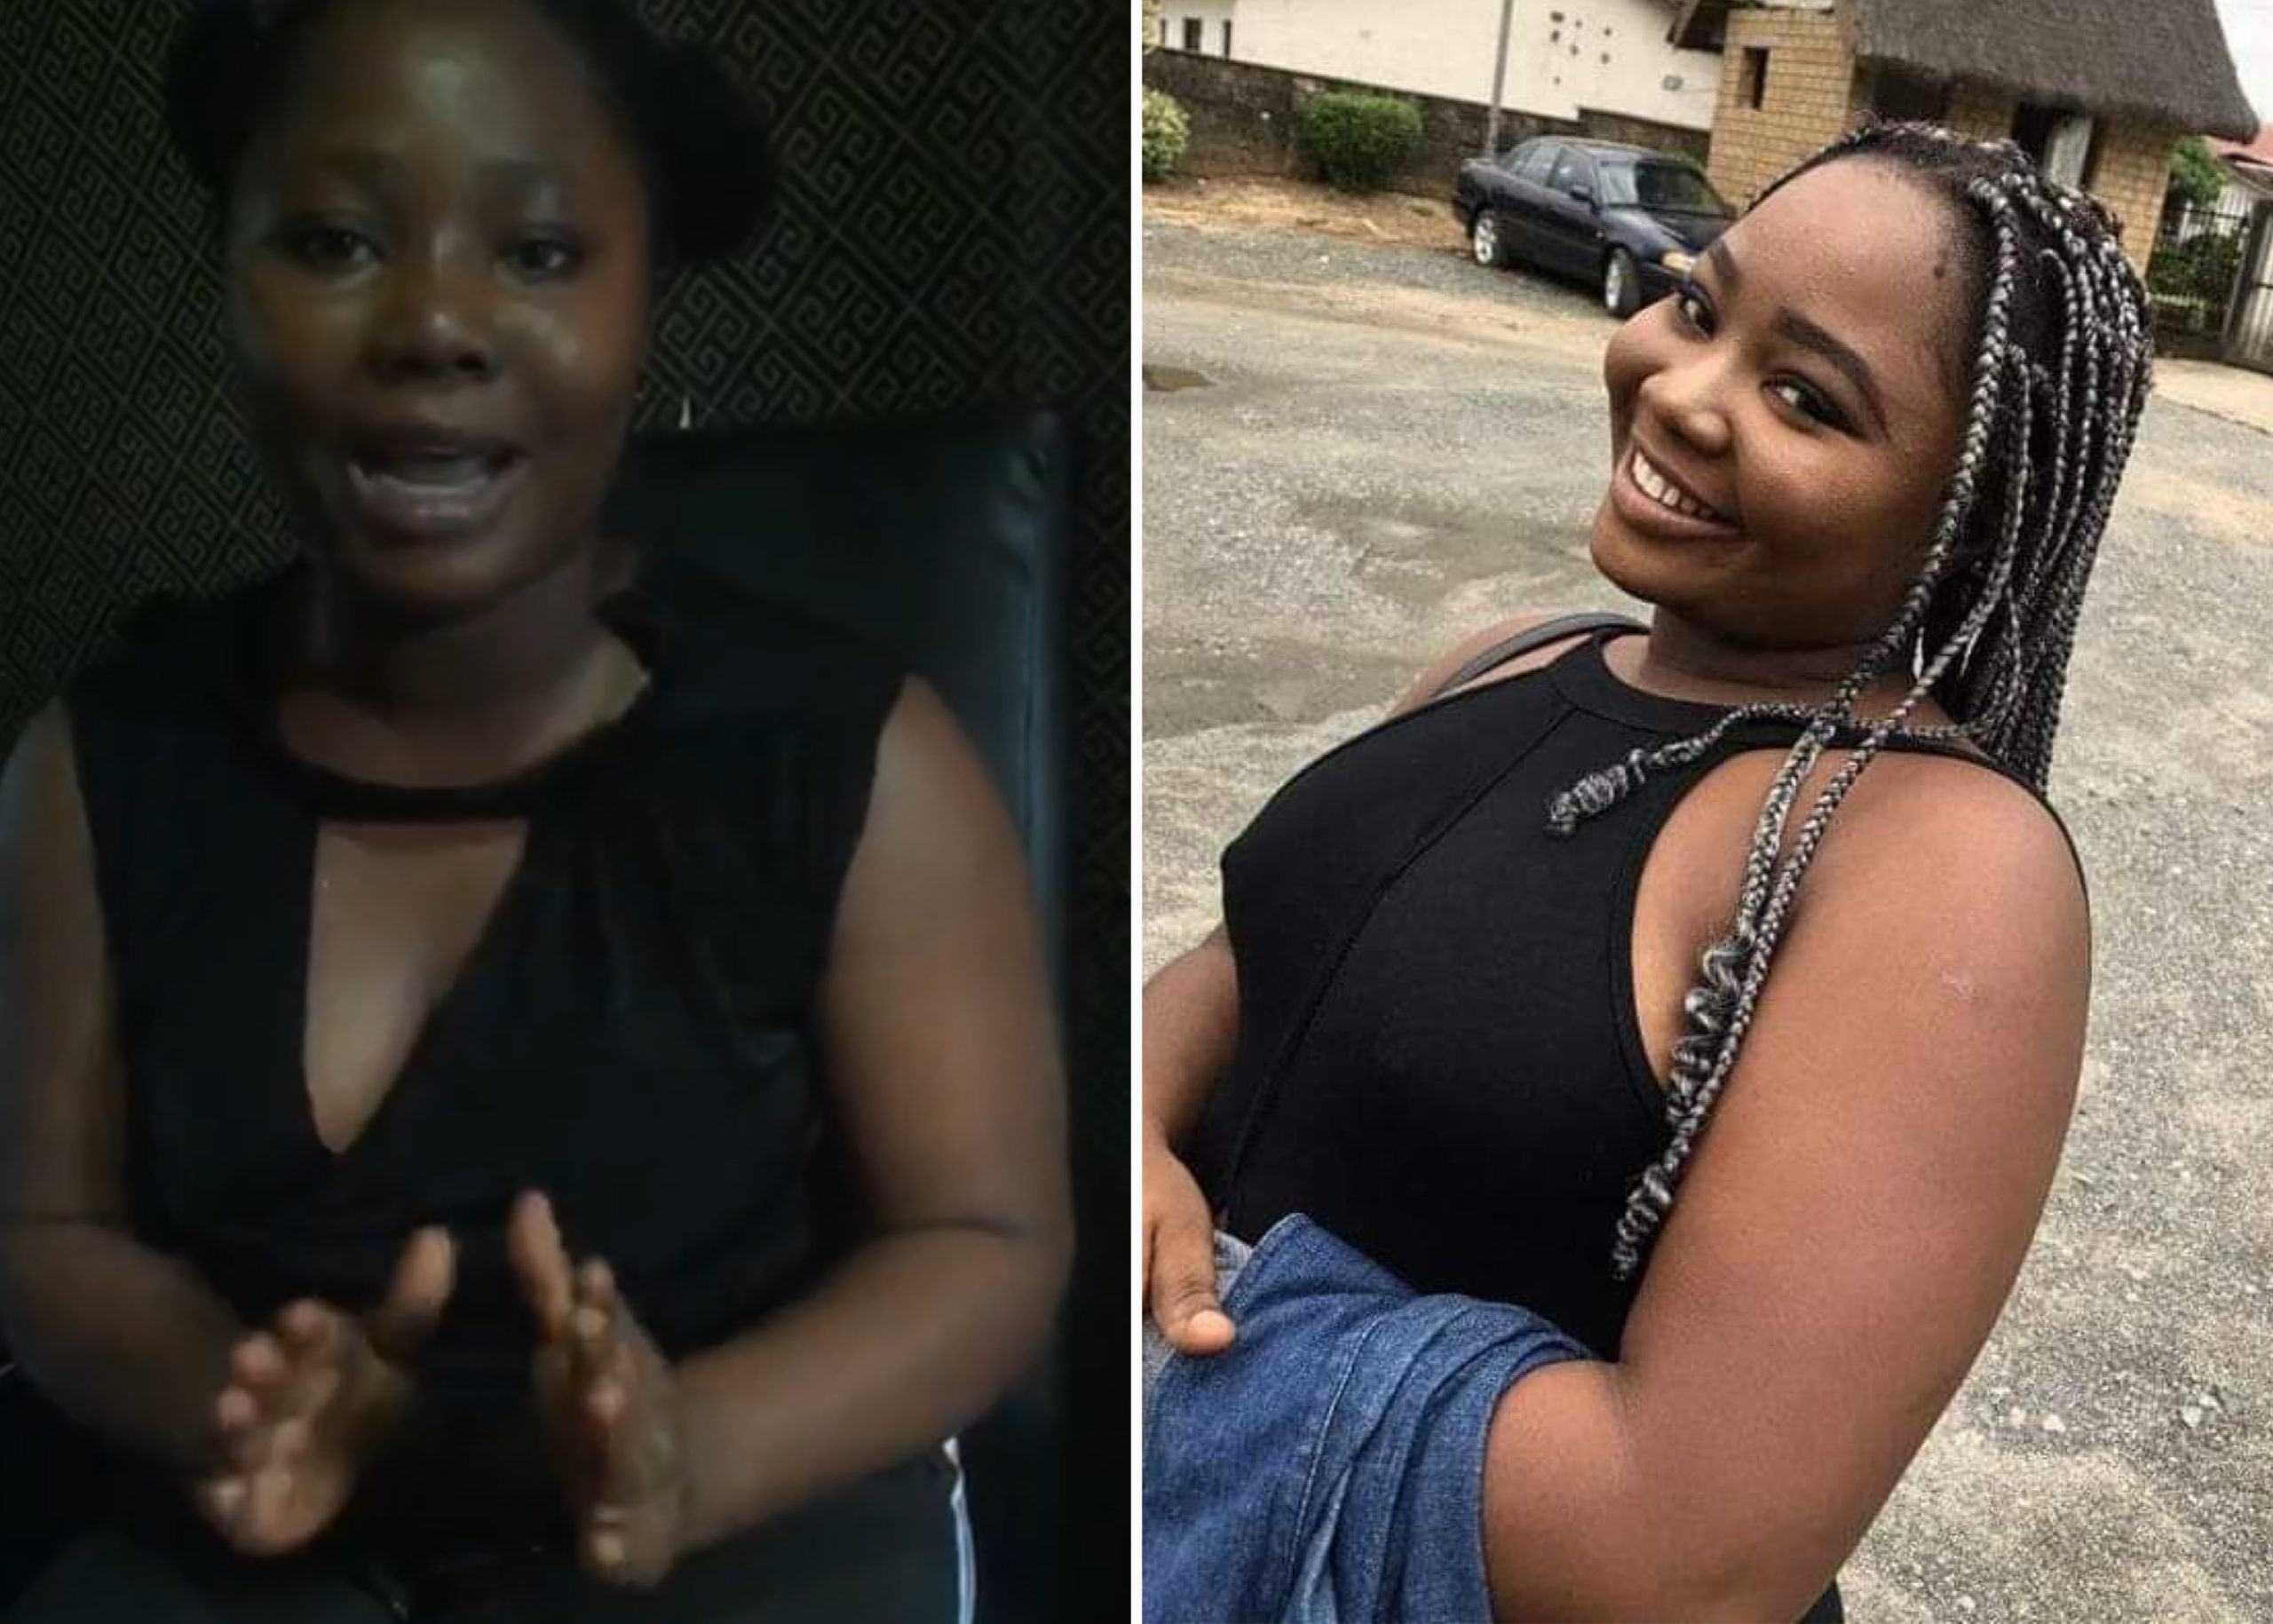 ‘I’m Alive, Not Missing’ - 22-Year-Old Cross River University Student Declared Missing Says